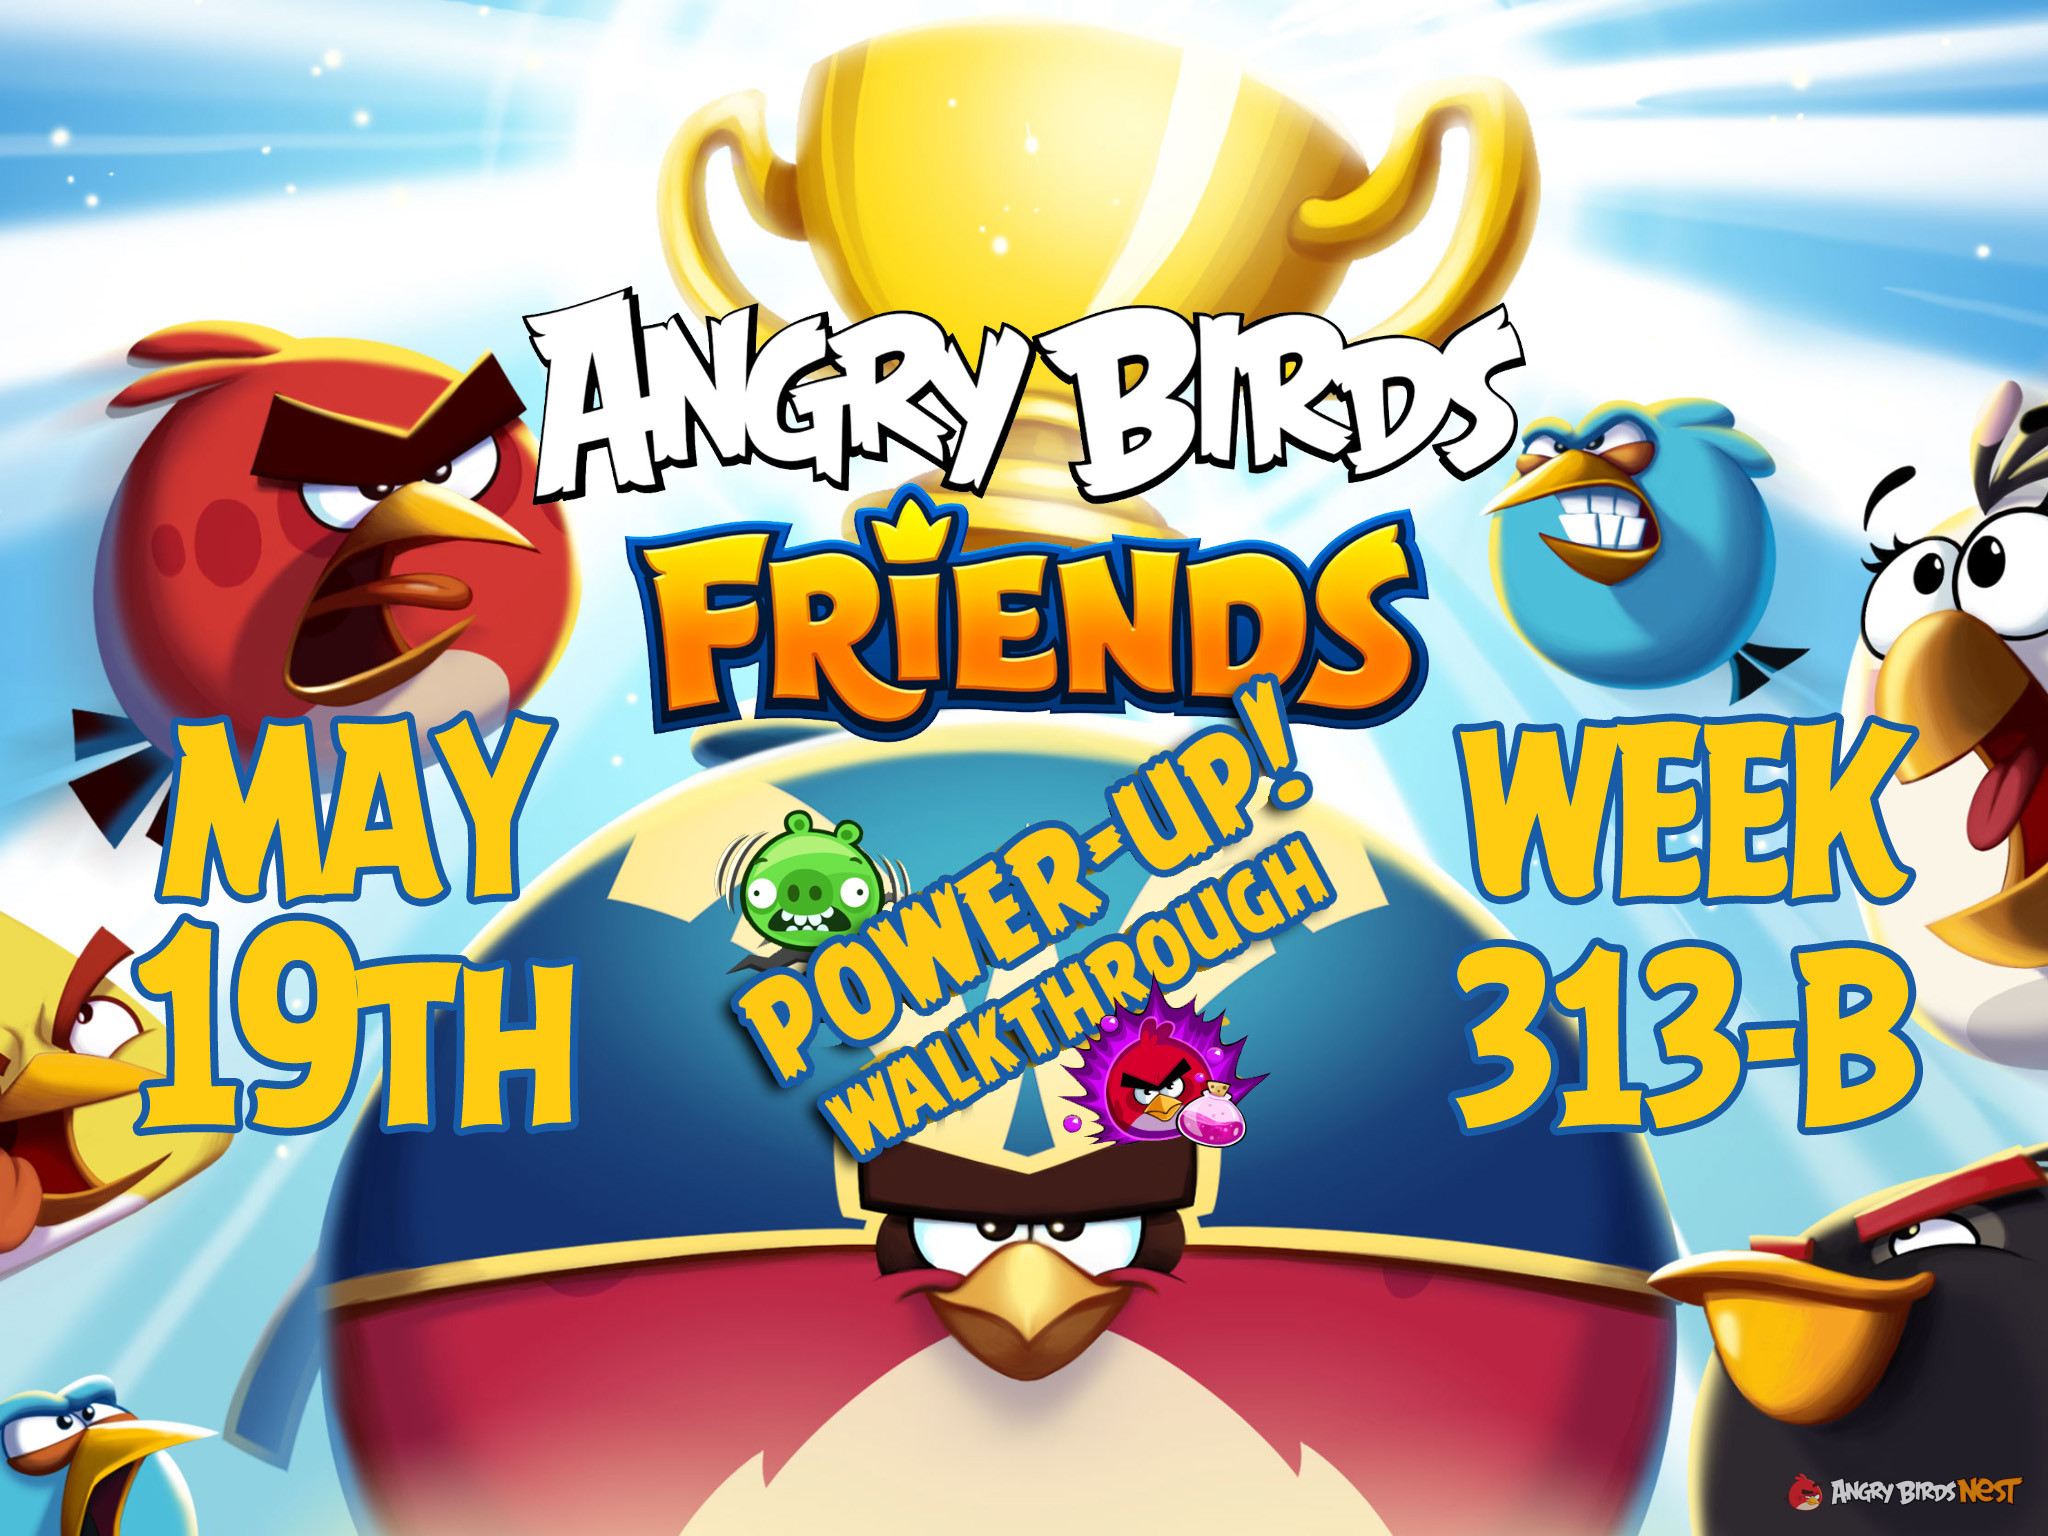 Angry Birds Friends Tournament Week 313-B Feature Image PU